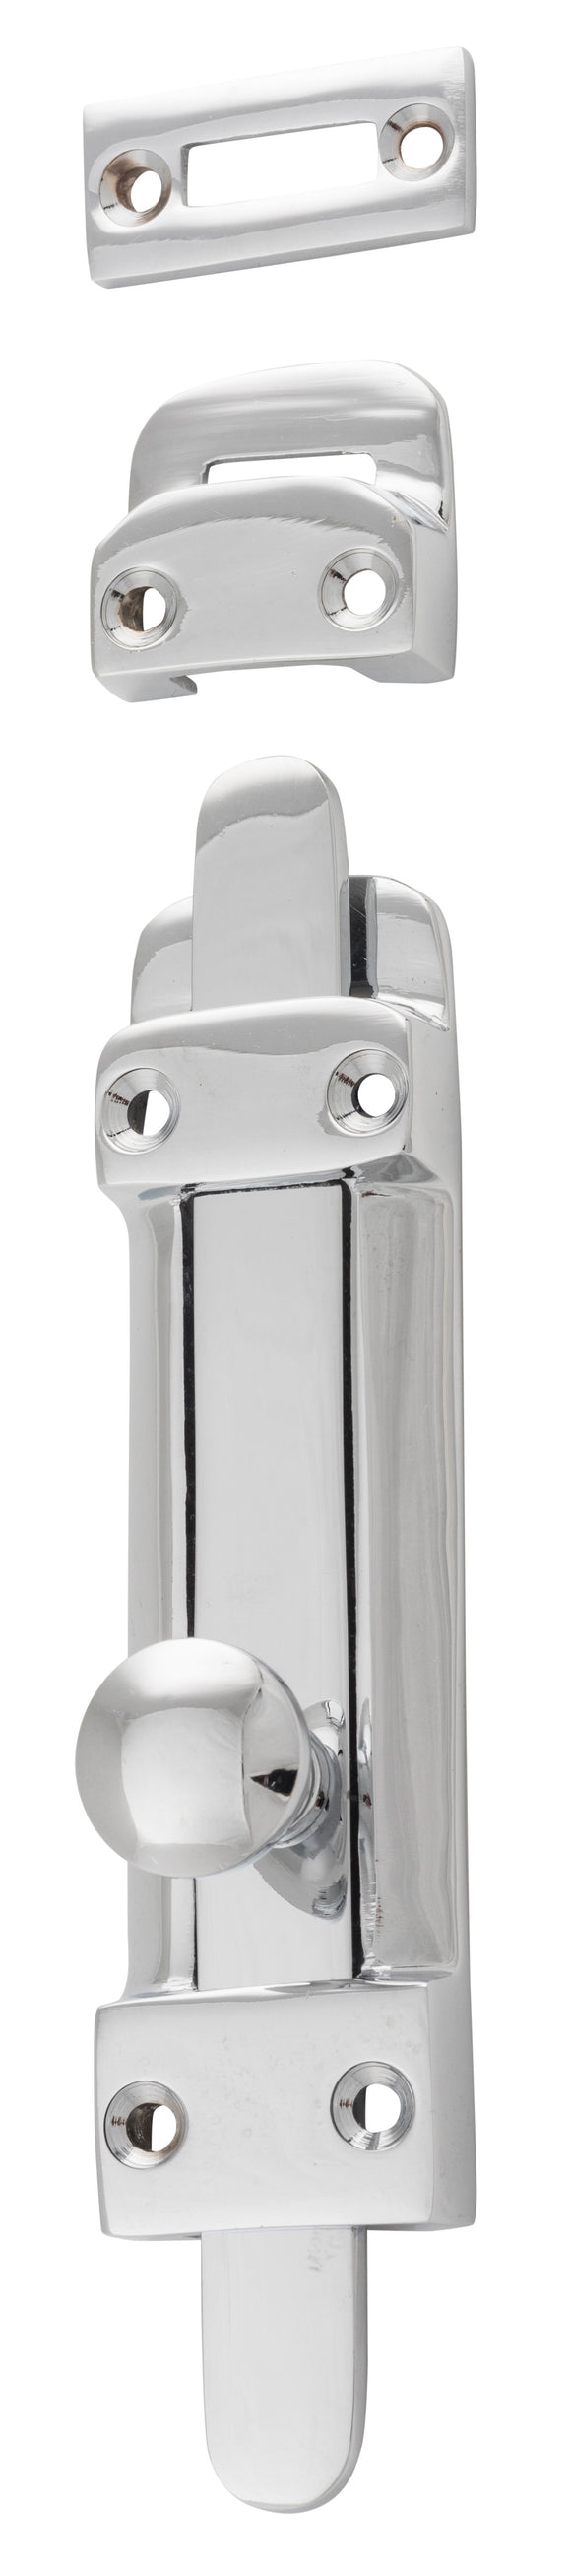 Tower Bolt Chrome Plated H118xW32mm